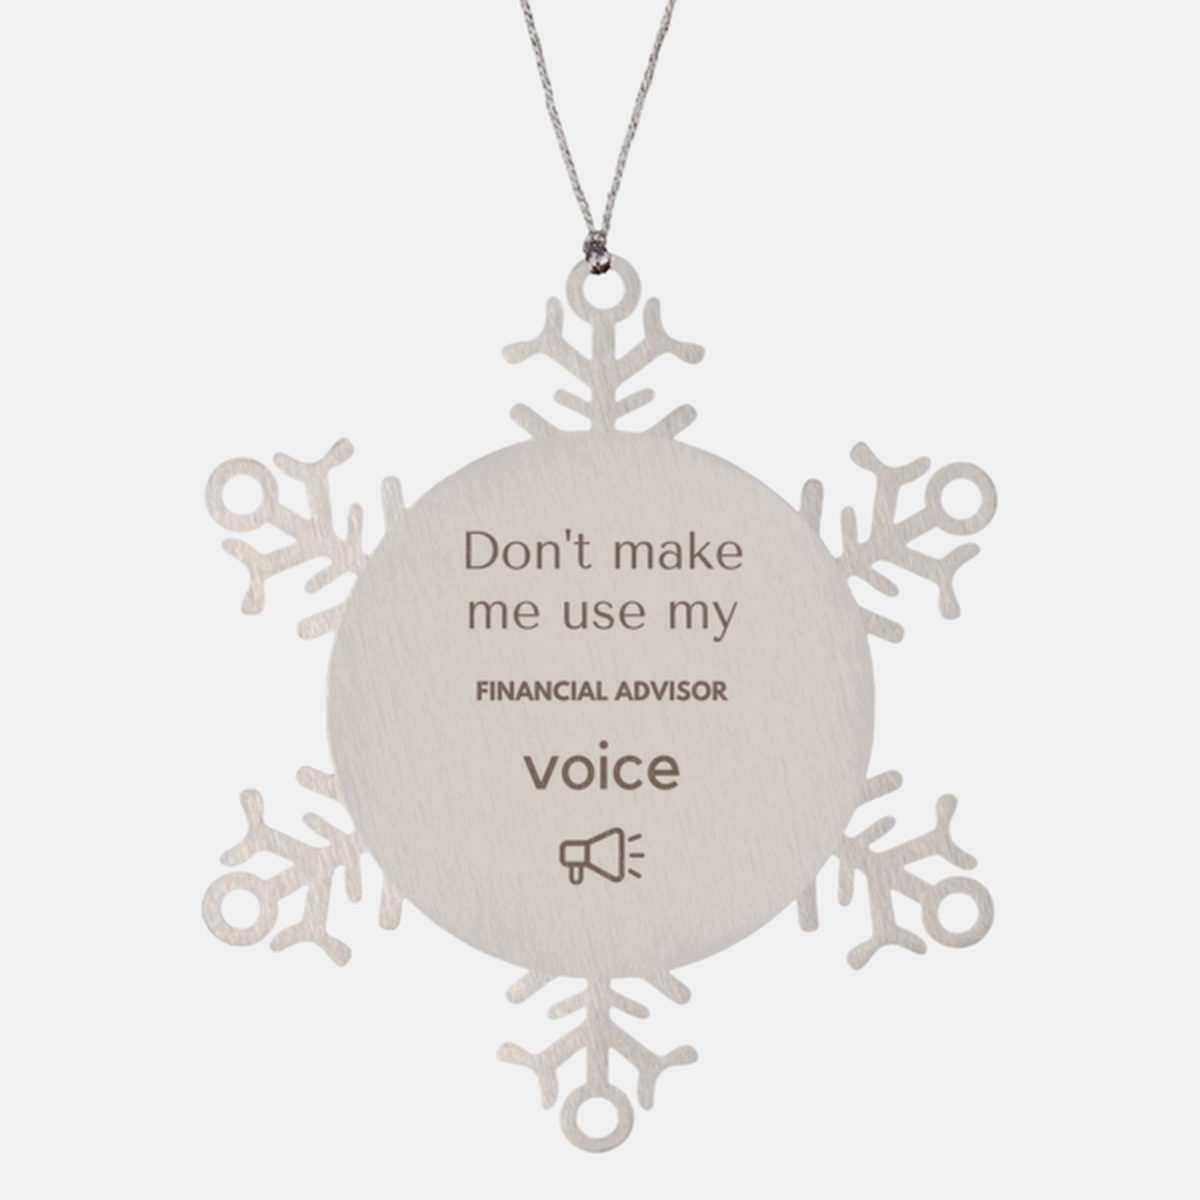 Don't make me use my Financial Advisor voice, Sarcasm Financial Advisor Ornament Gifts, Christmas Financial Advisor Snowflake Ornament Unique Gifts For Financial Advisor Coworkers, Men, Women, Colleague, Friends